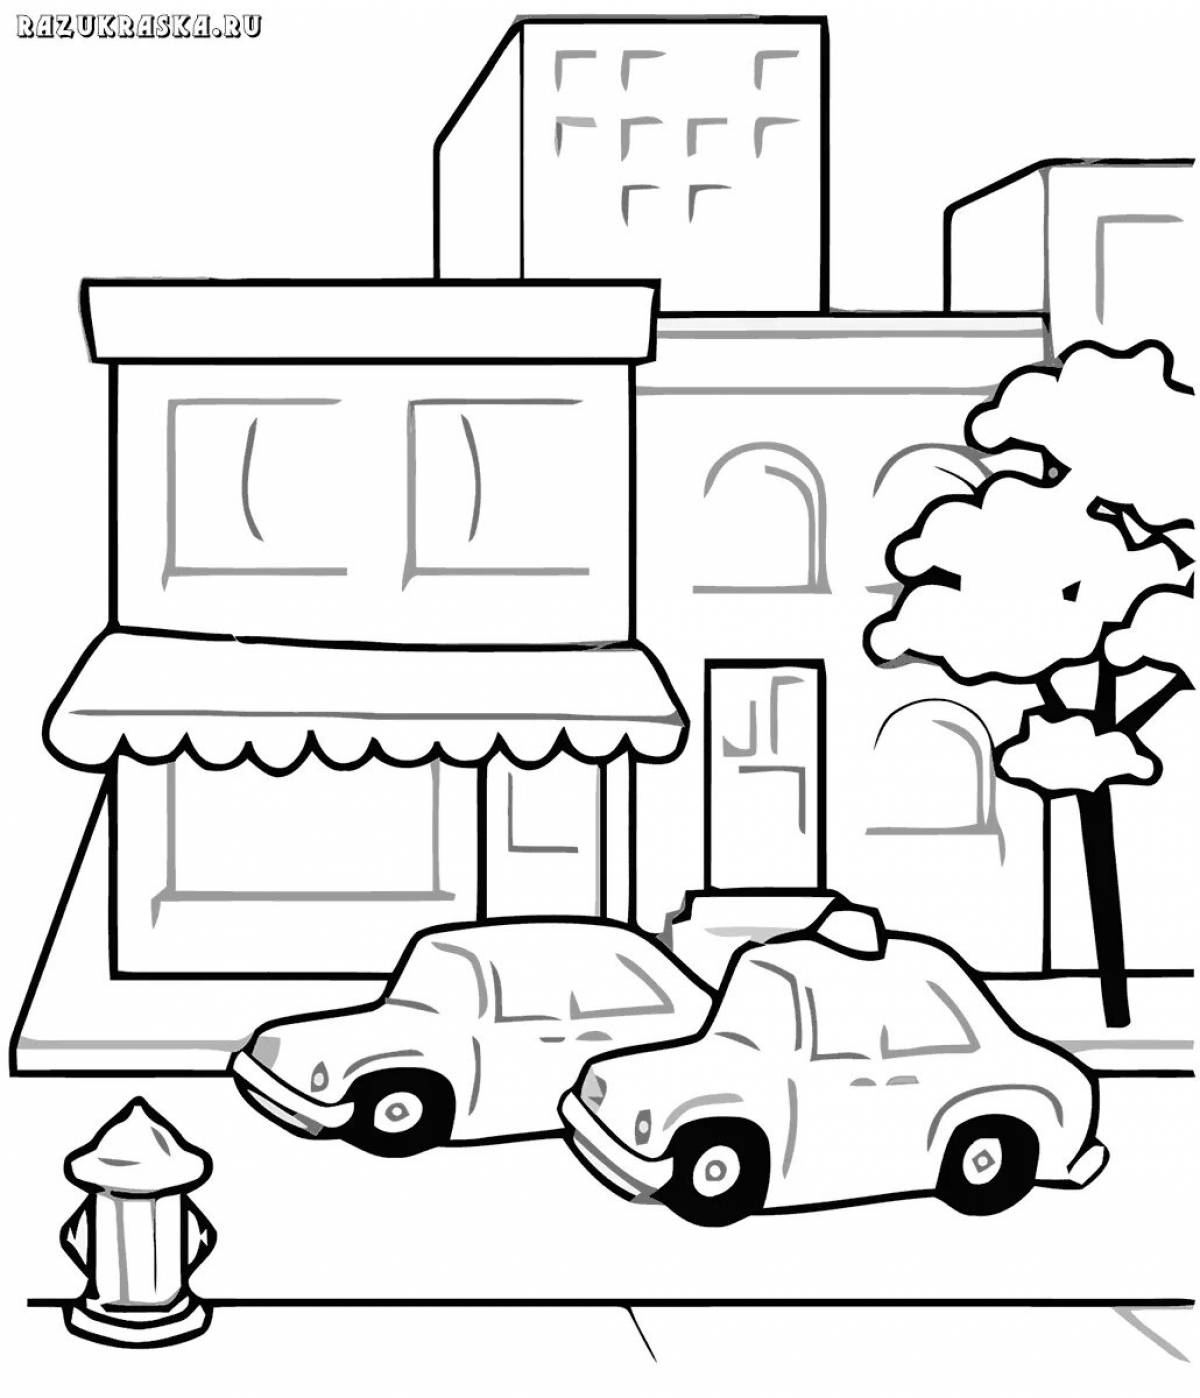 Crazy city coloring pages for 3-4 year olds